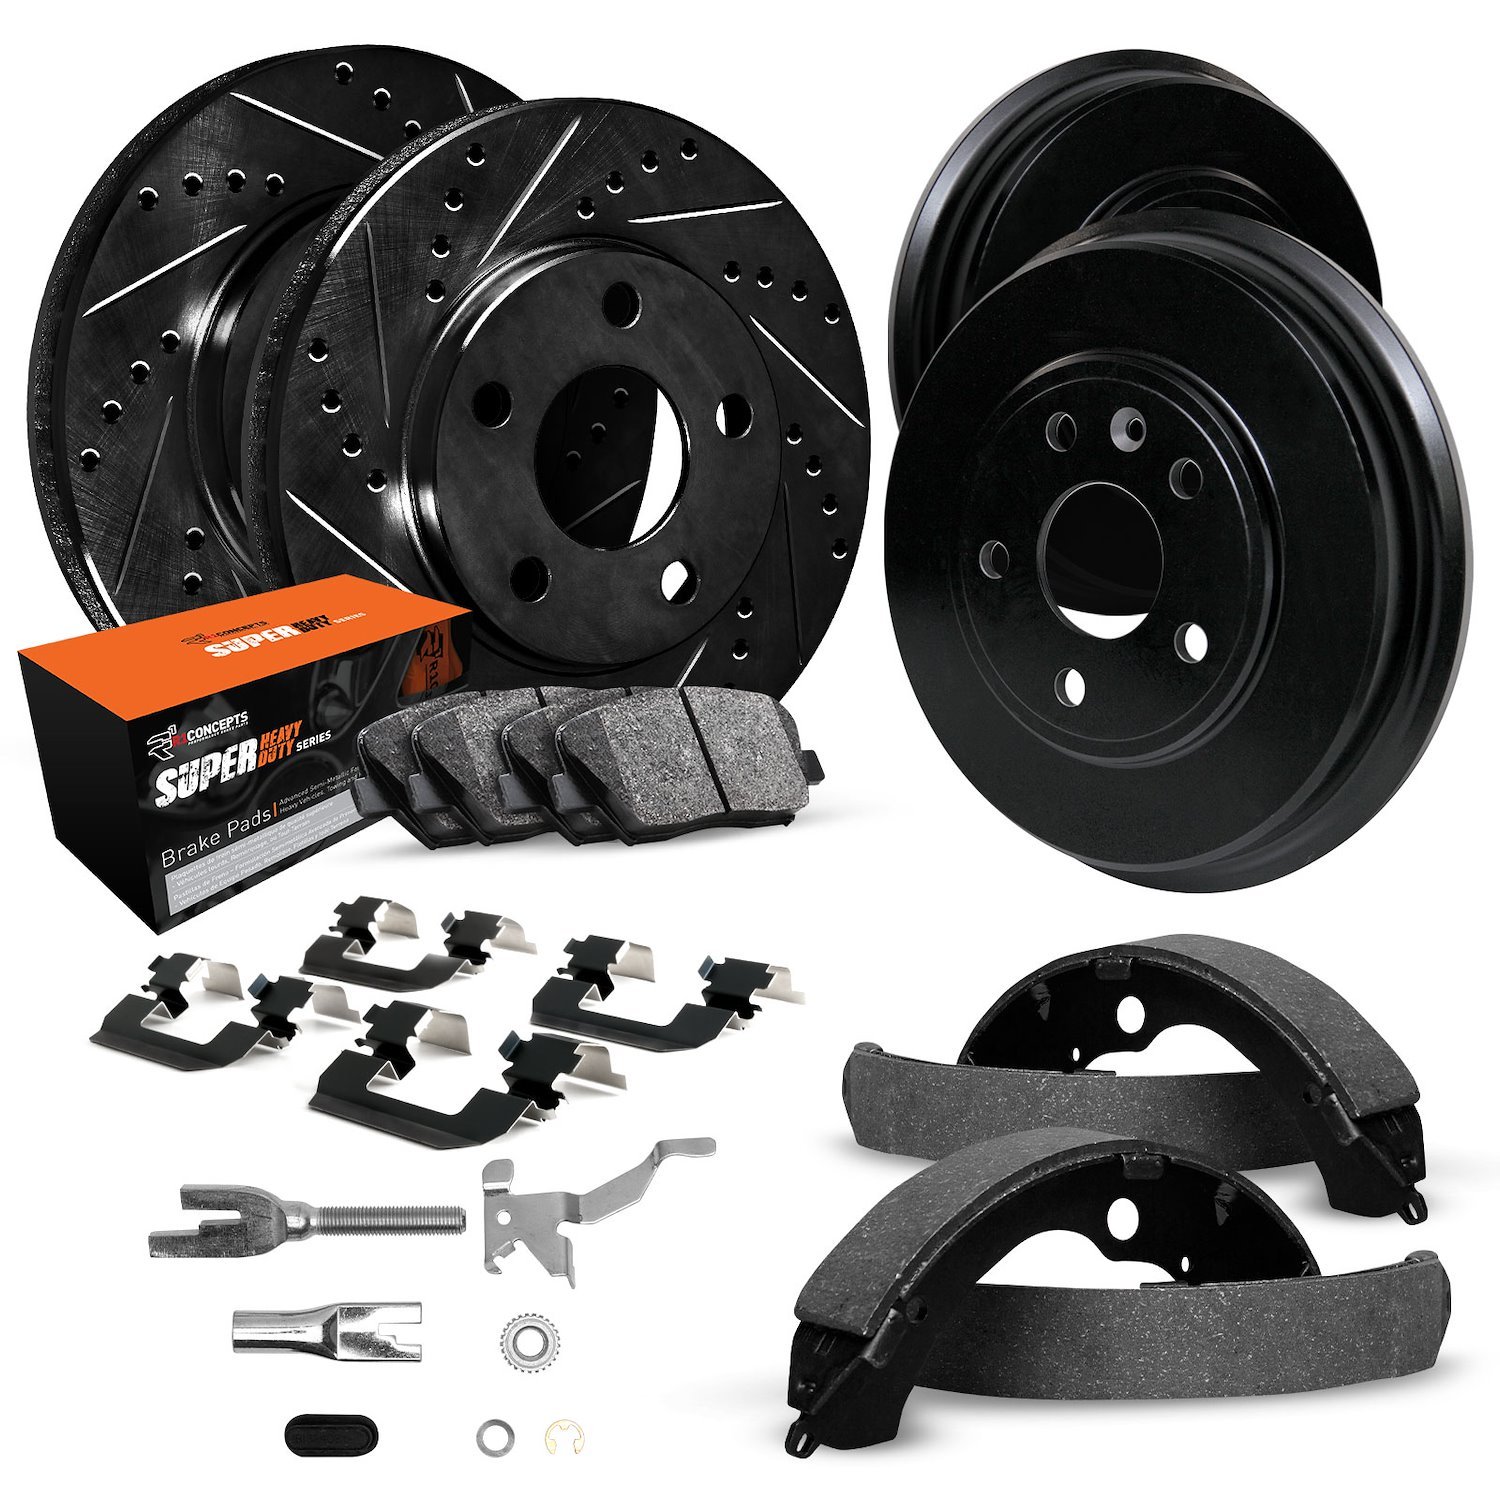 E-Line Drilled/Slotted Black Rotor & Drum Set w/Super-Duty Pads, Shoes, Hardware/Adjusters, 1990-2000 GM